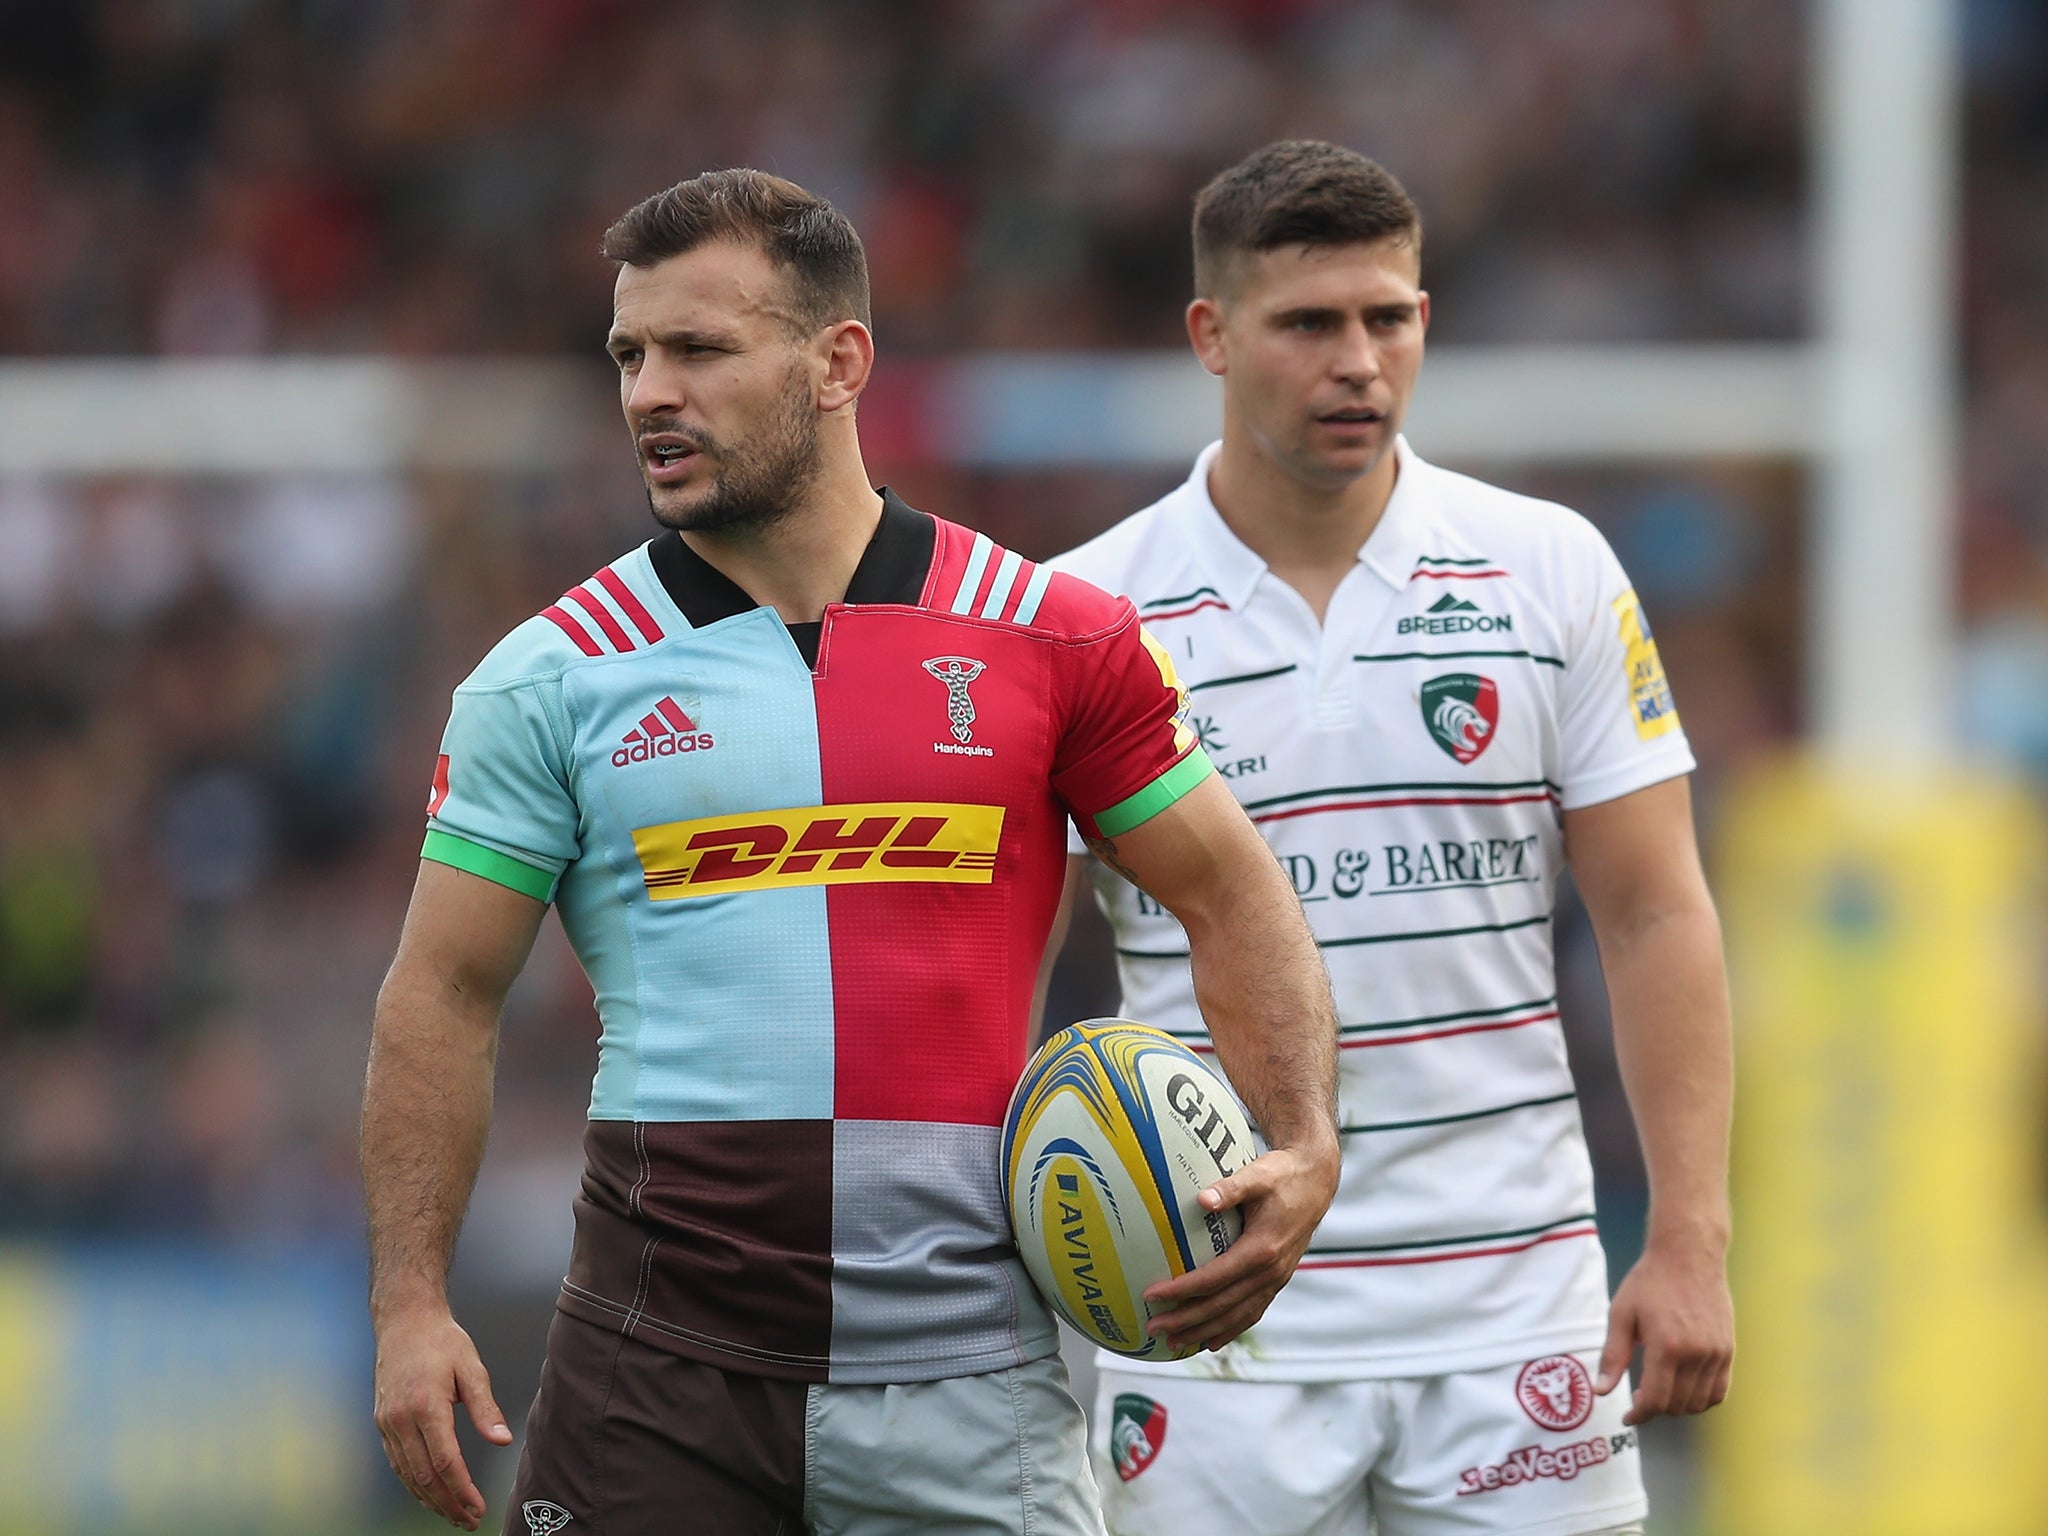 &#13;
Care hopes his good form for Quins will help him beat Youngs to the England No 9 shirt &#13;